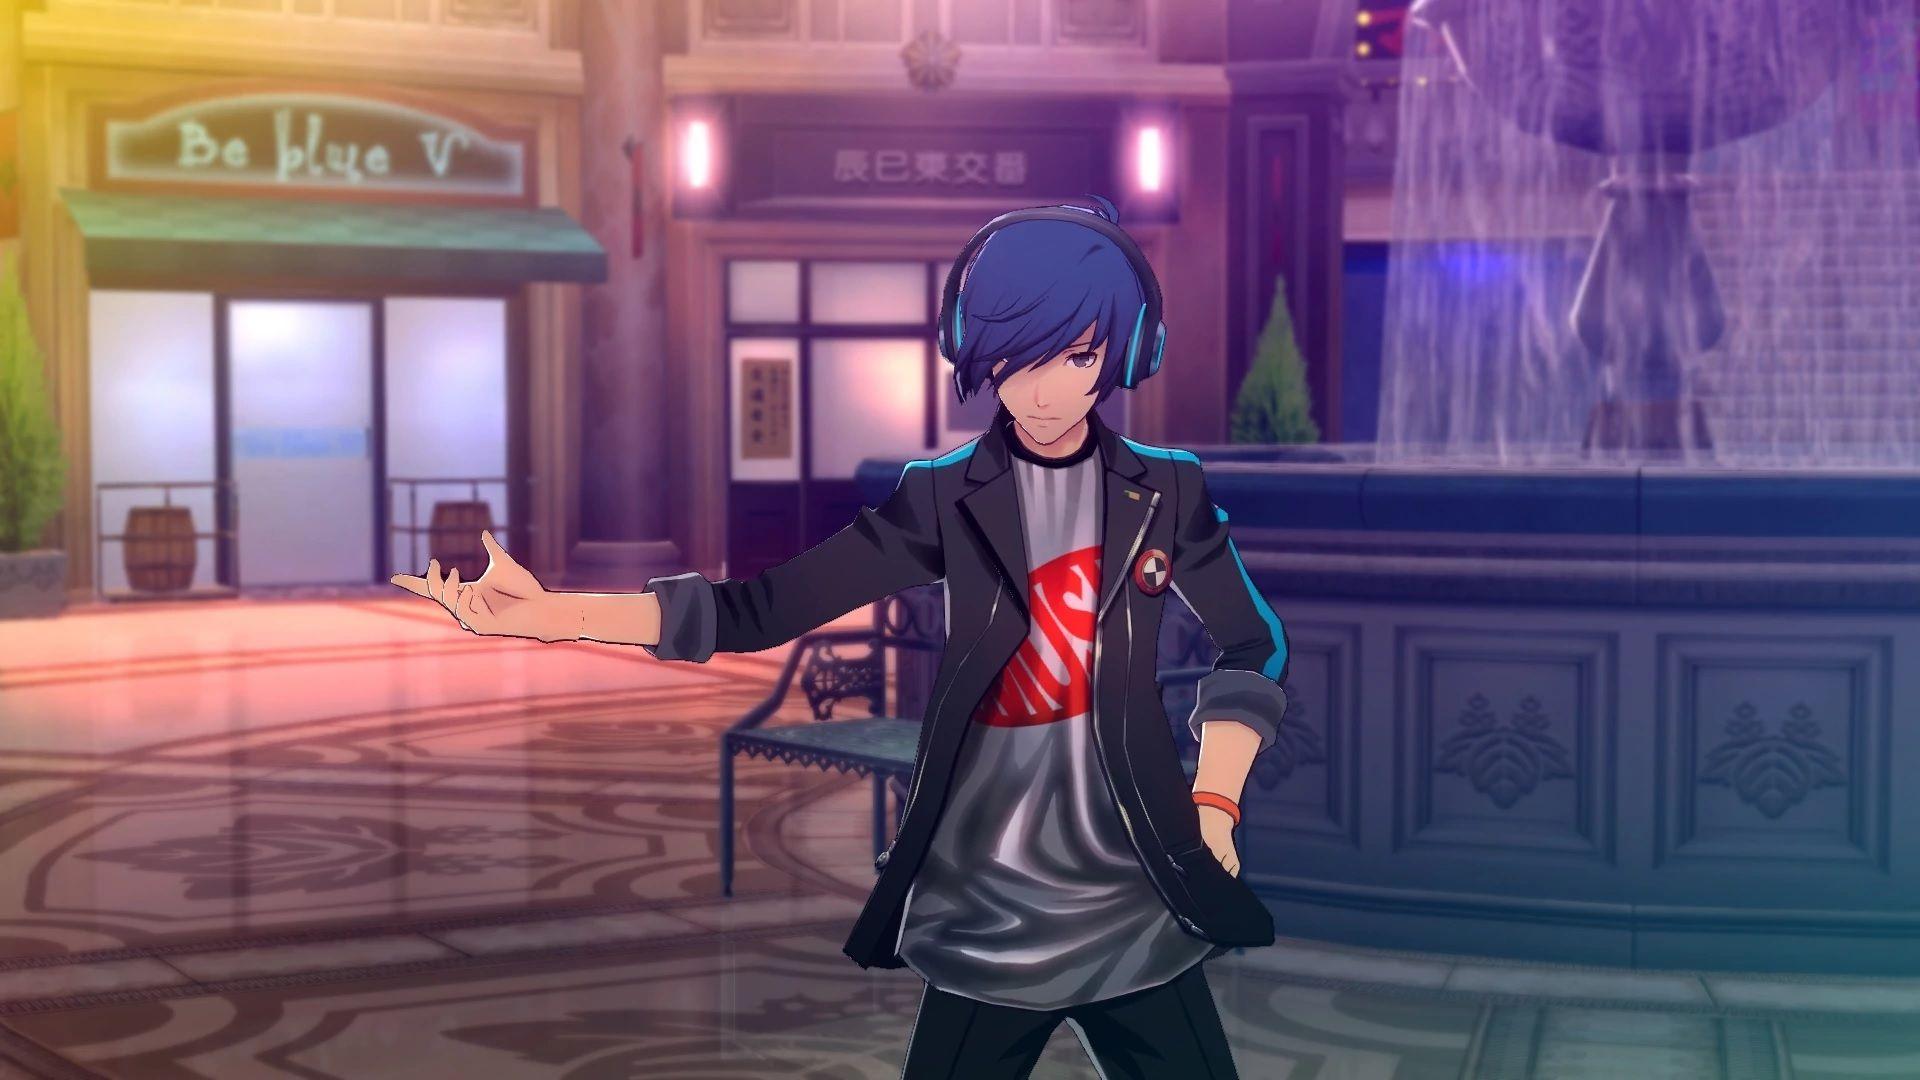 Persona 3 And Persona 5 Dance Spin Offs To Feature PSVR Support